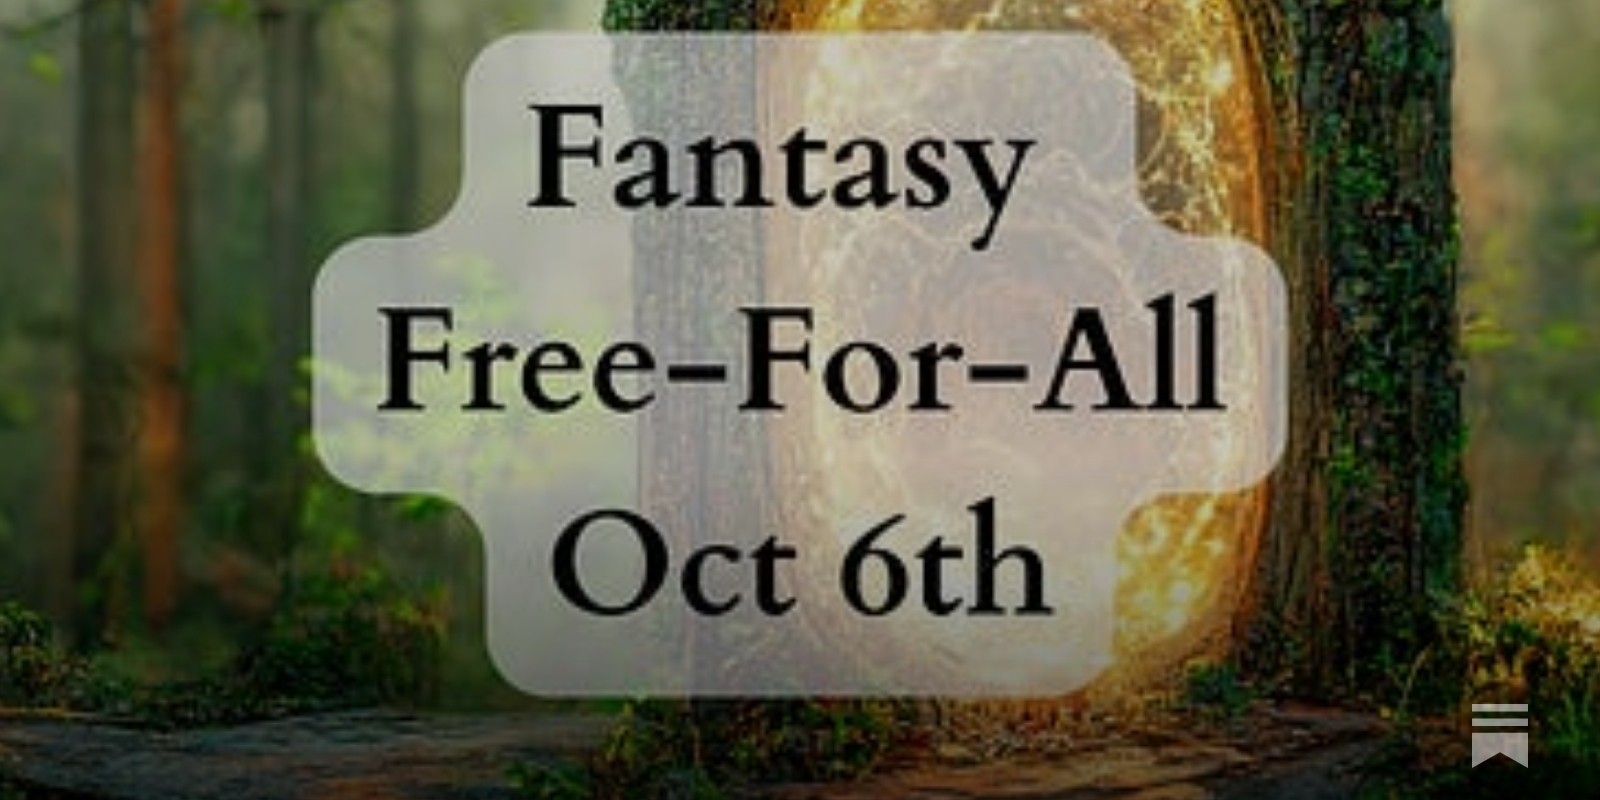 Fantasy Free-For-All - by Toni - From Pages to Portals